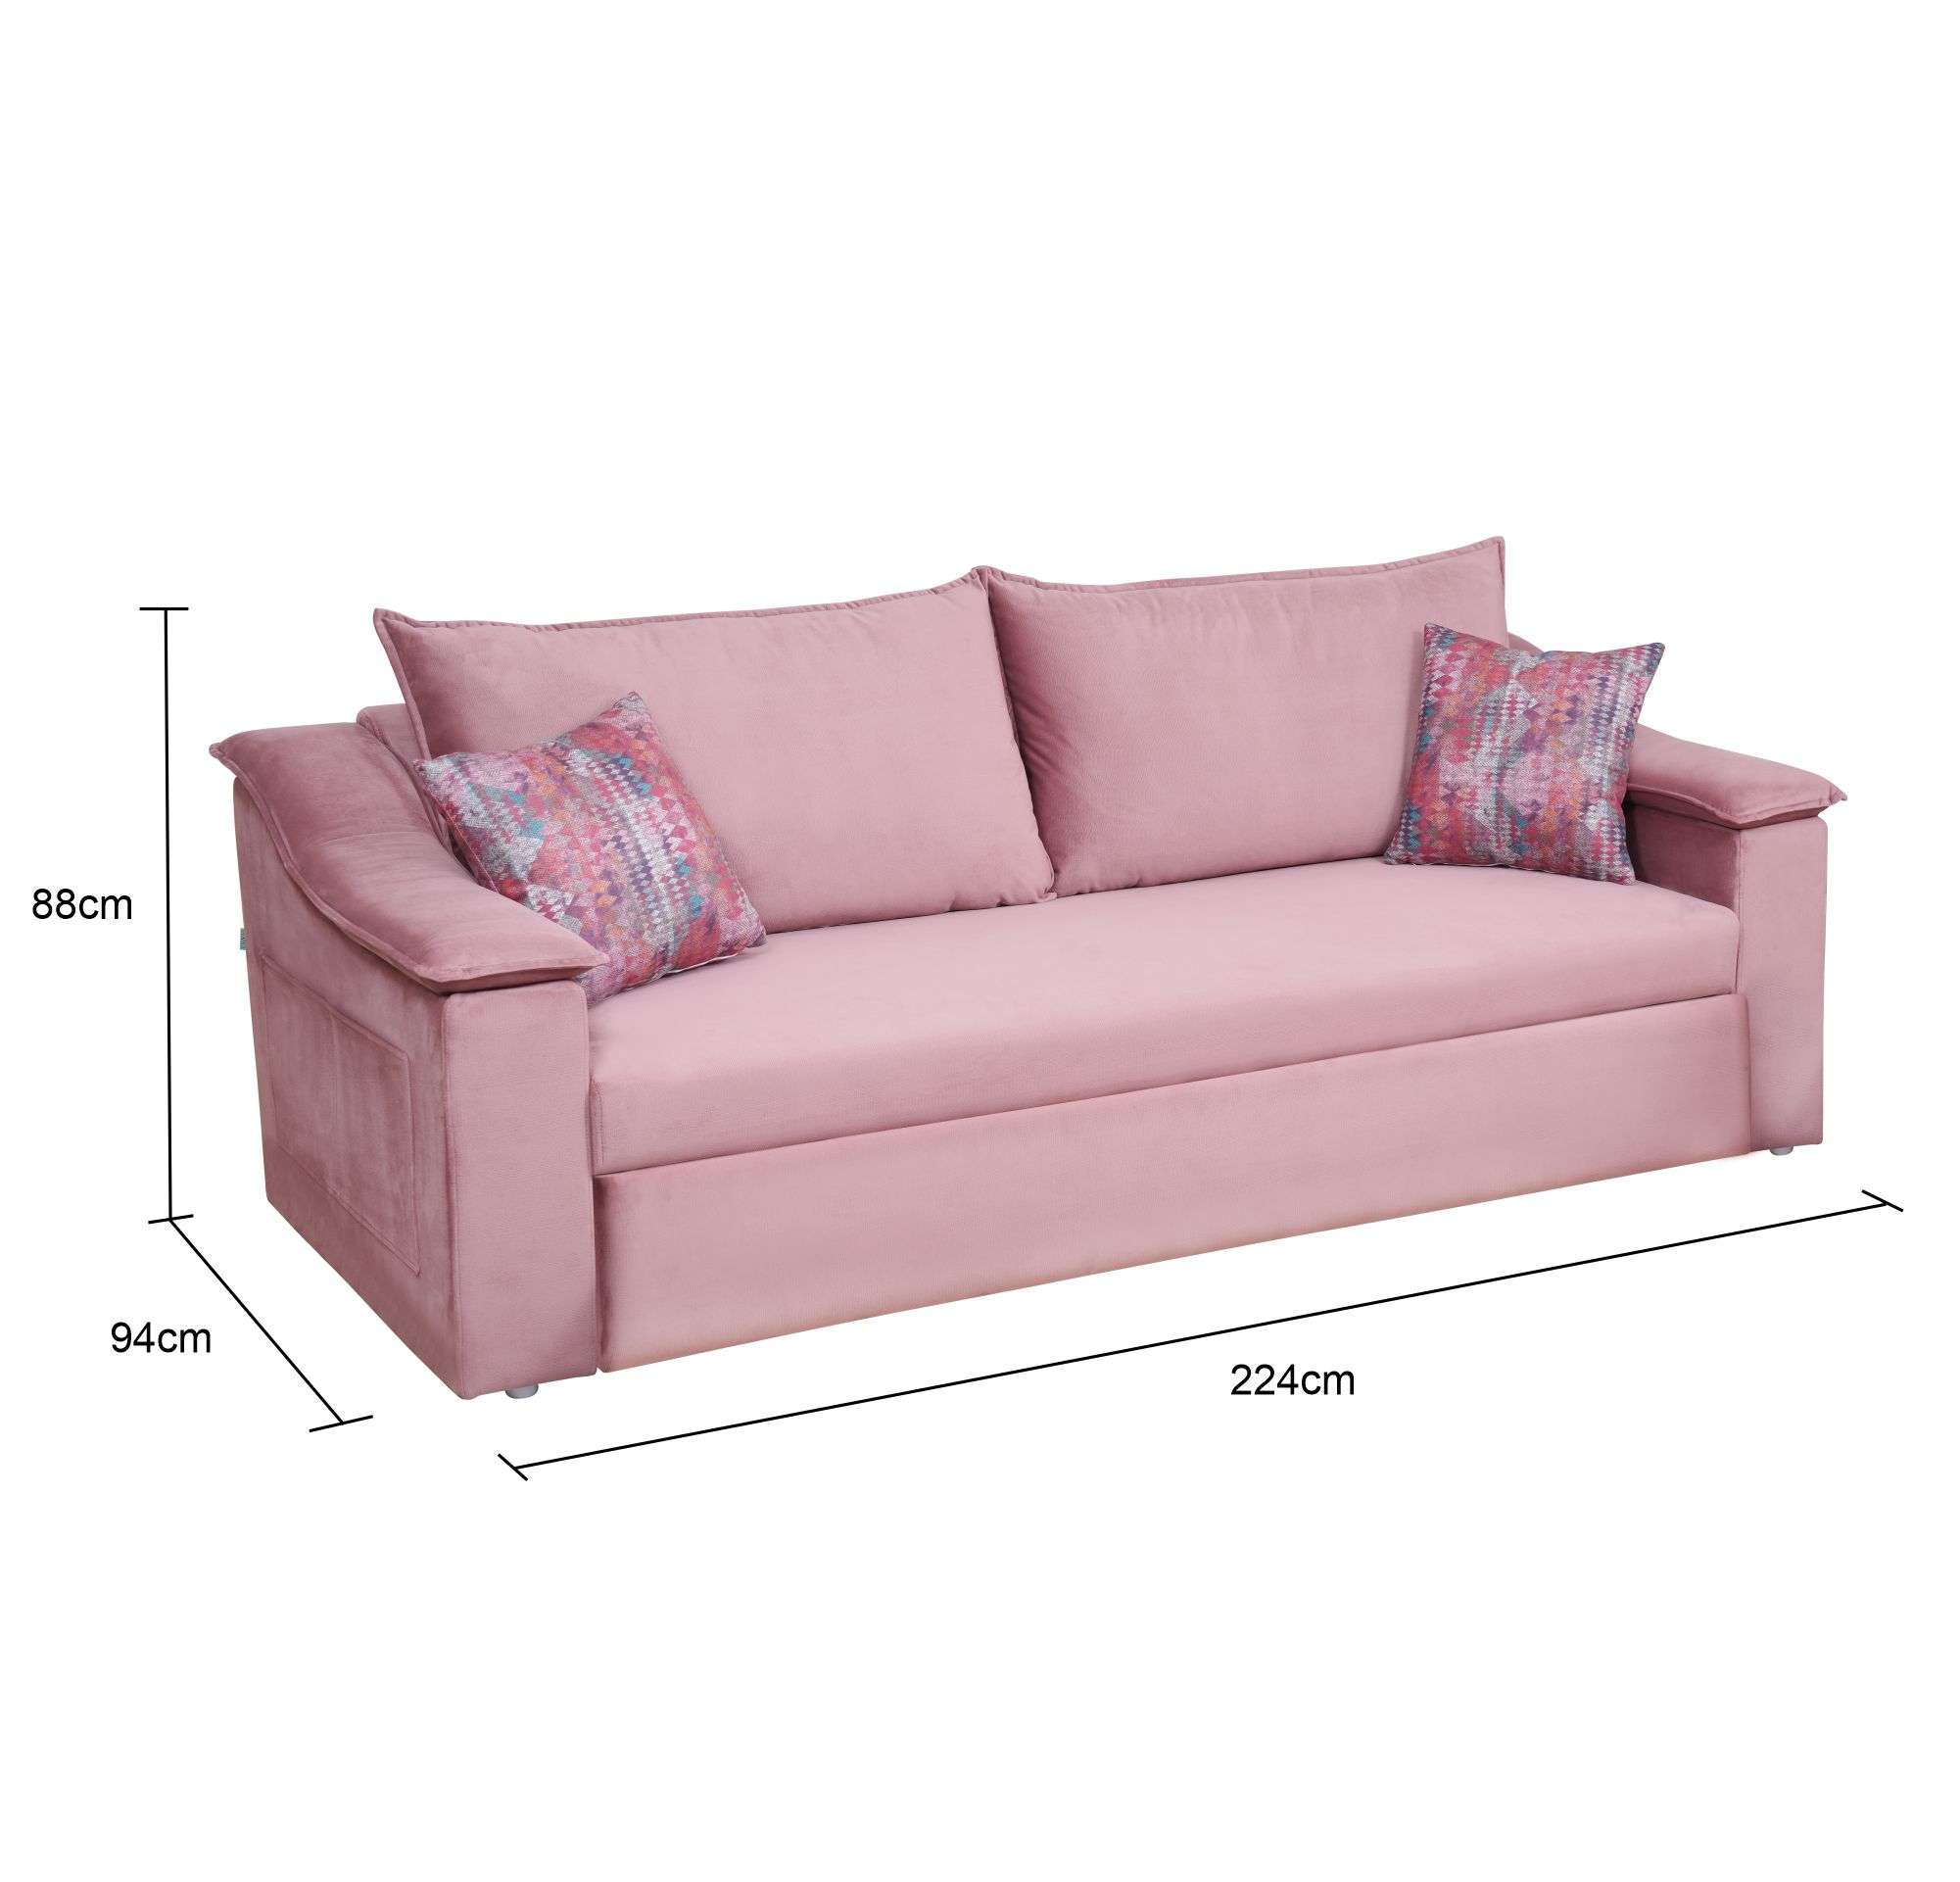 LVESCBWR003-Wrangler Three seater sofa bed with Two Pillows-Blush Pink